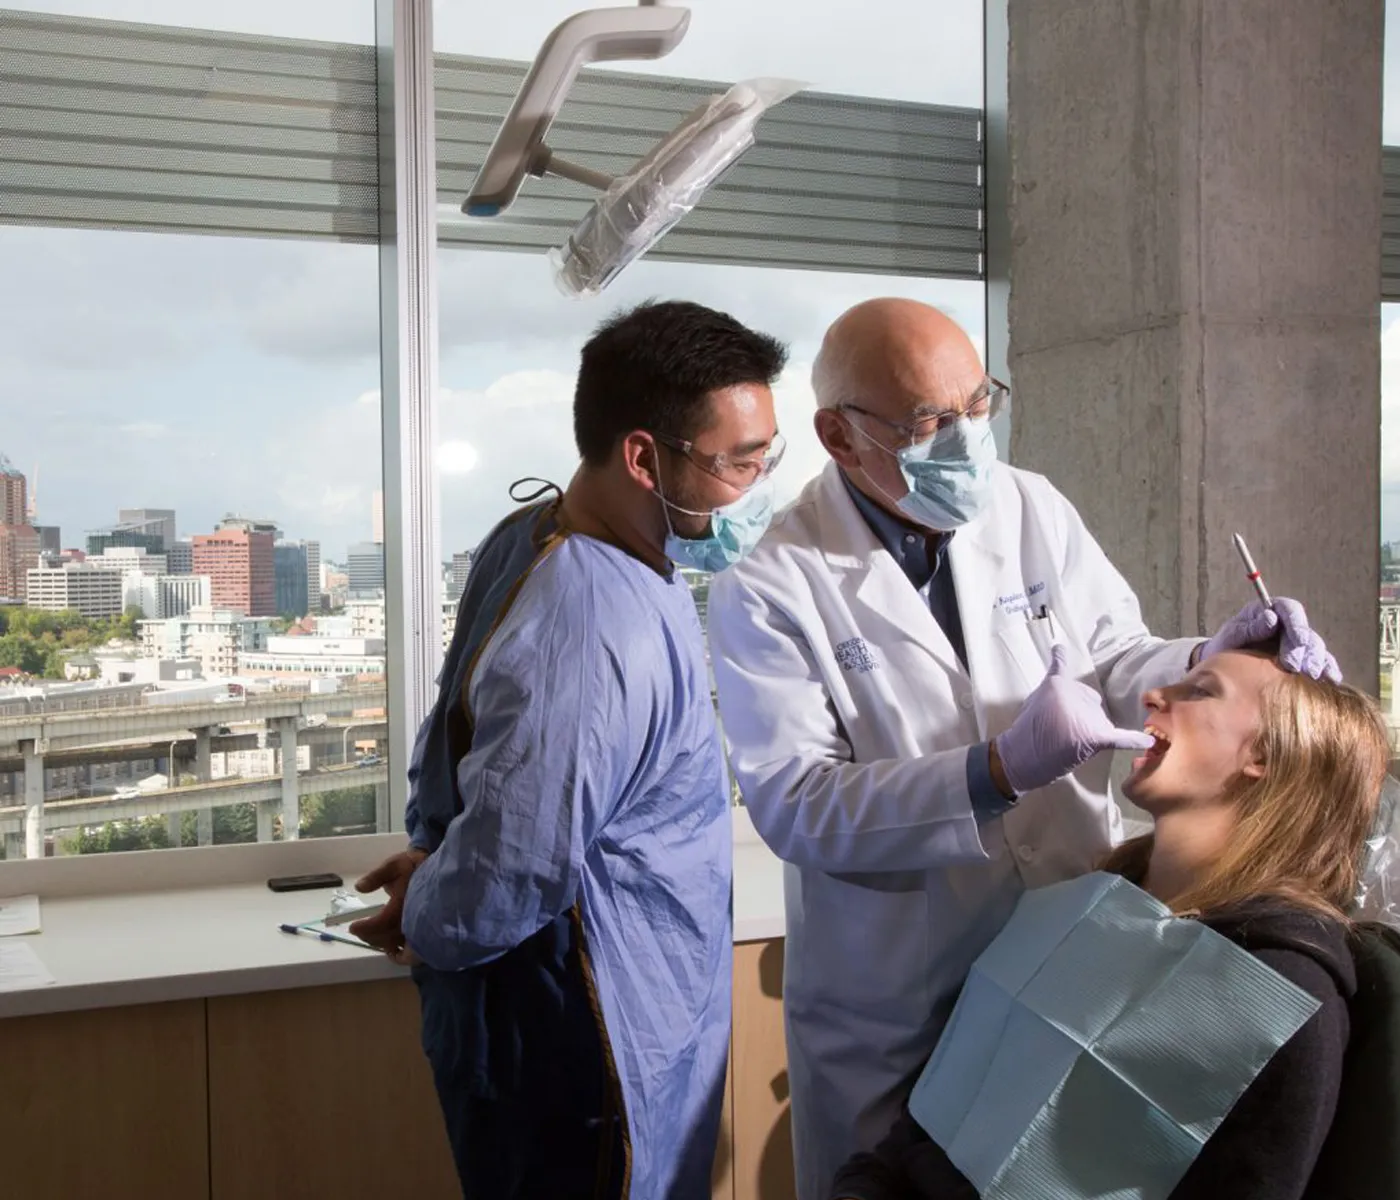 School of dentistry student observes faculty member conducting a procedure on a patient